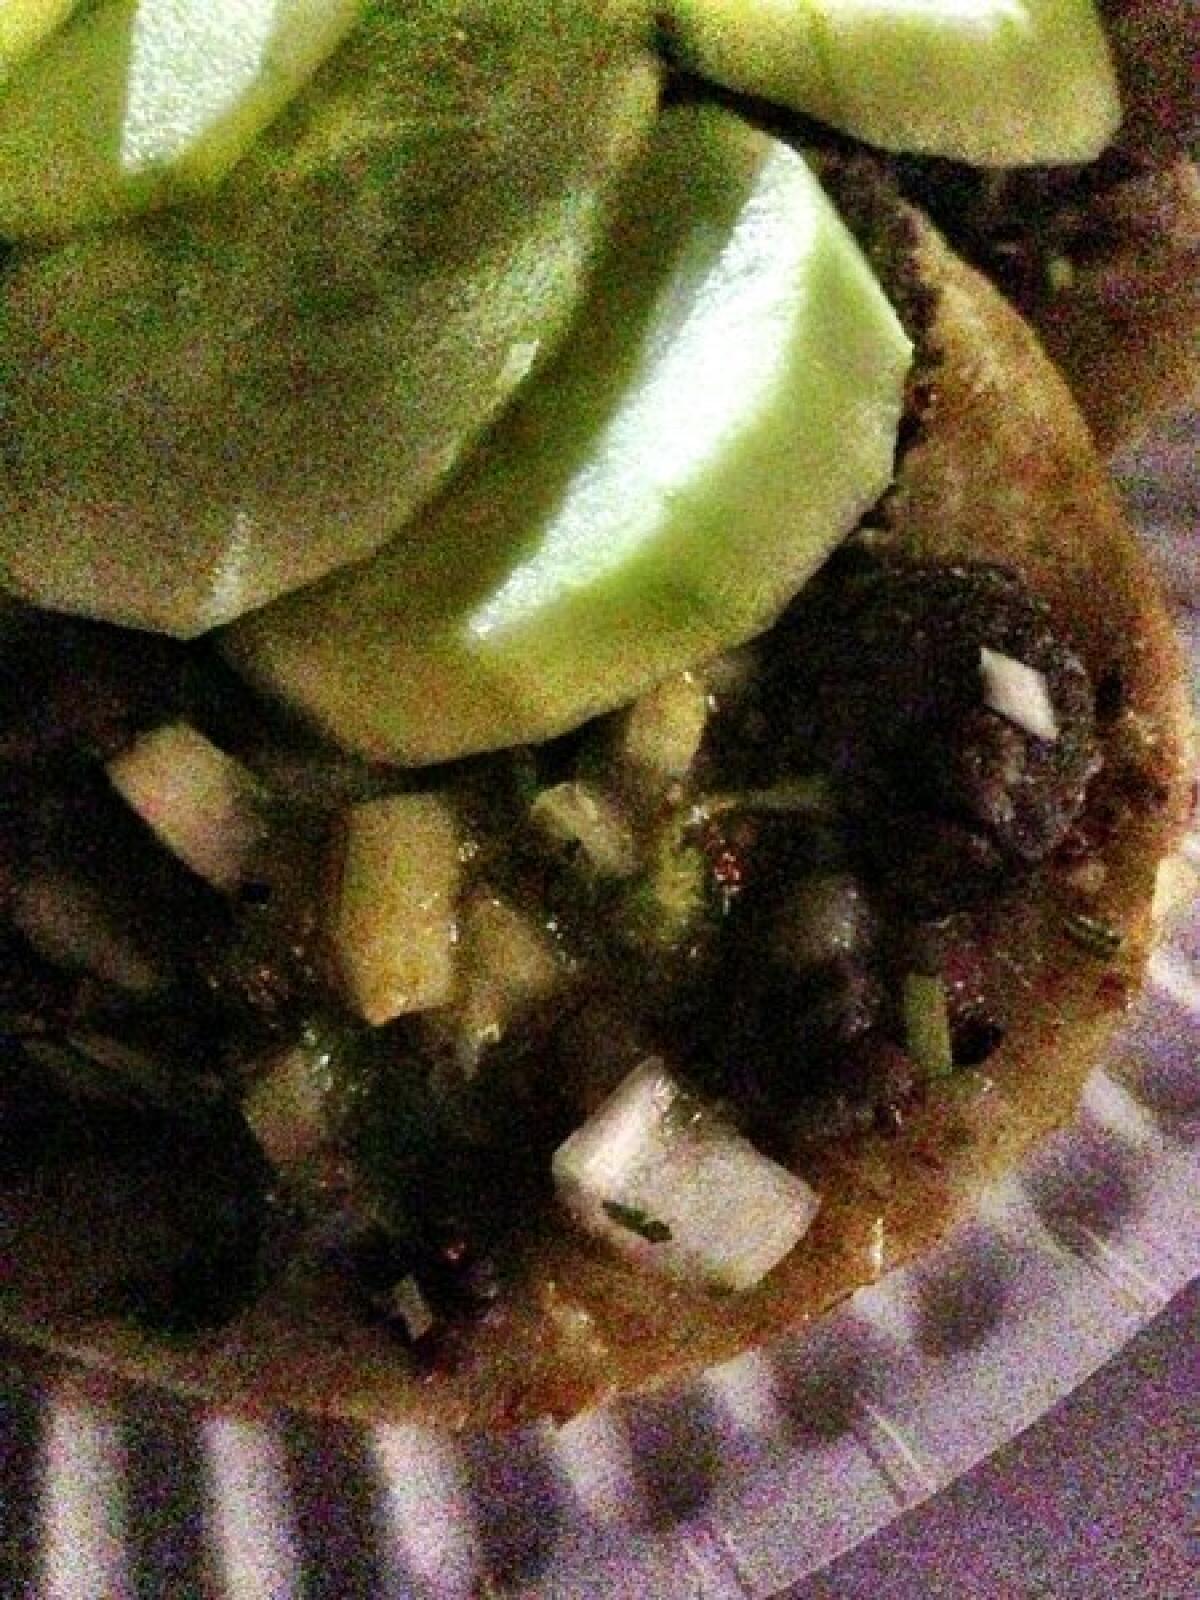 Sometimes, the taco de cabeza on the way home is the best bite of the evening.